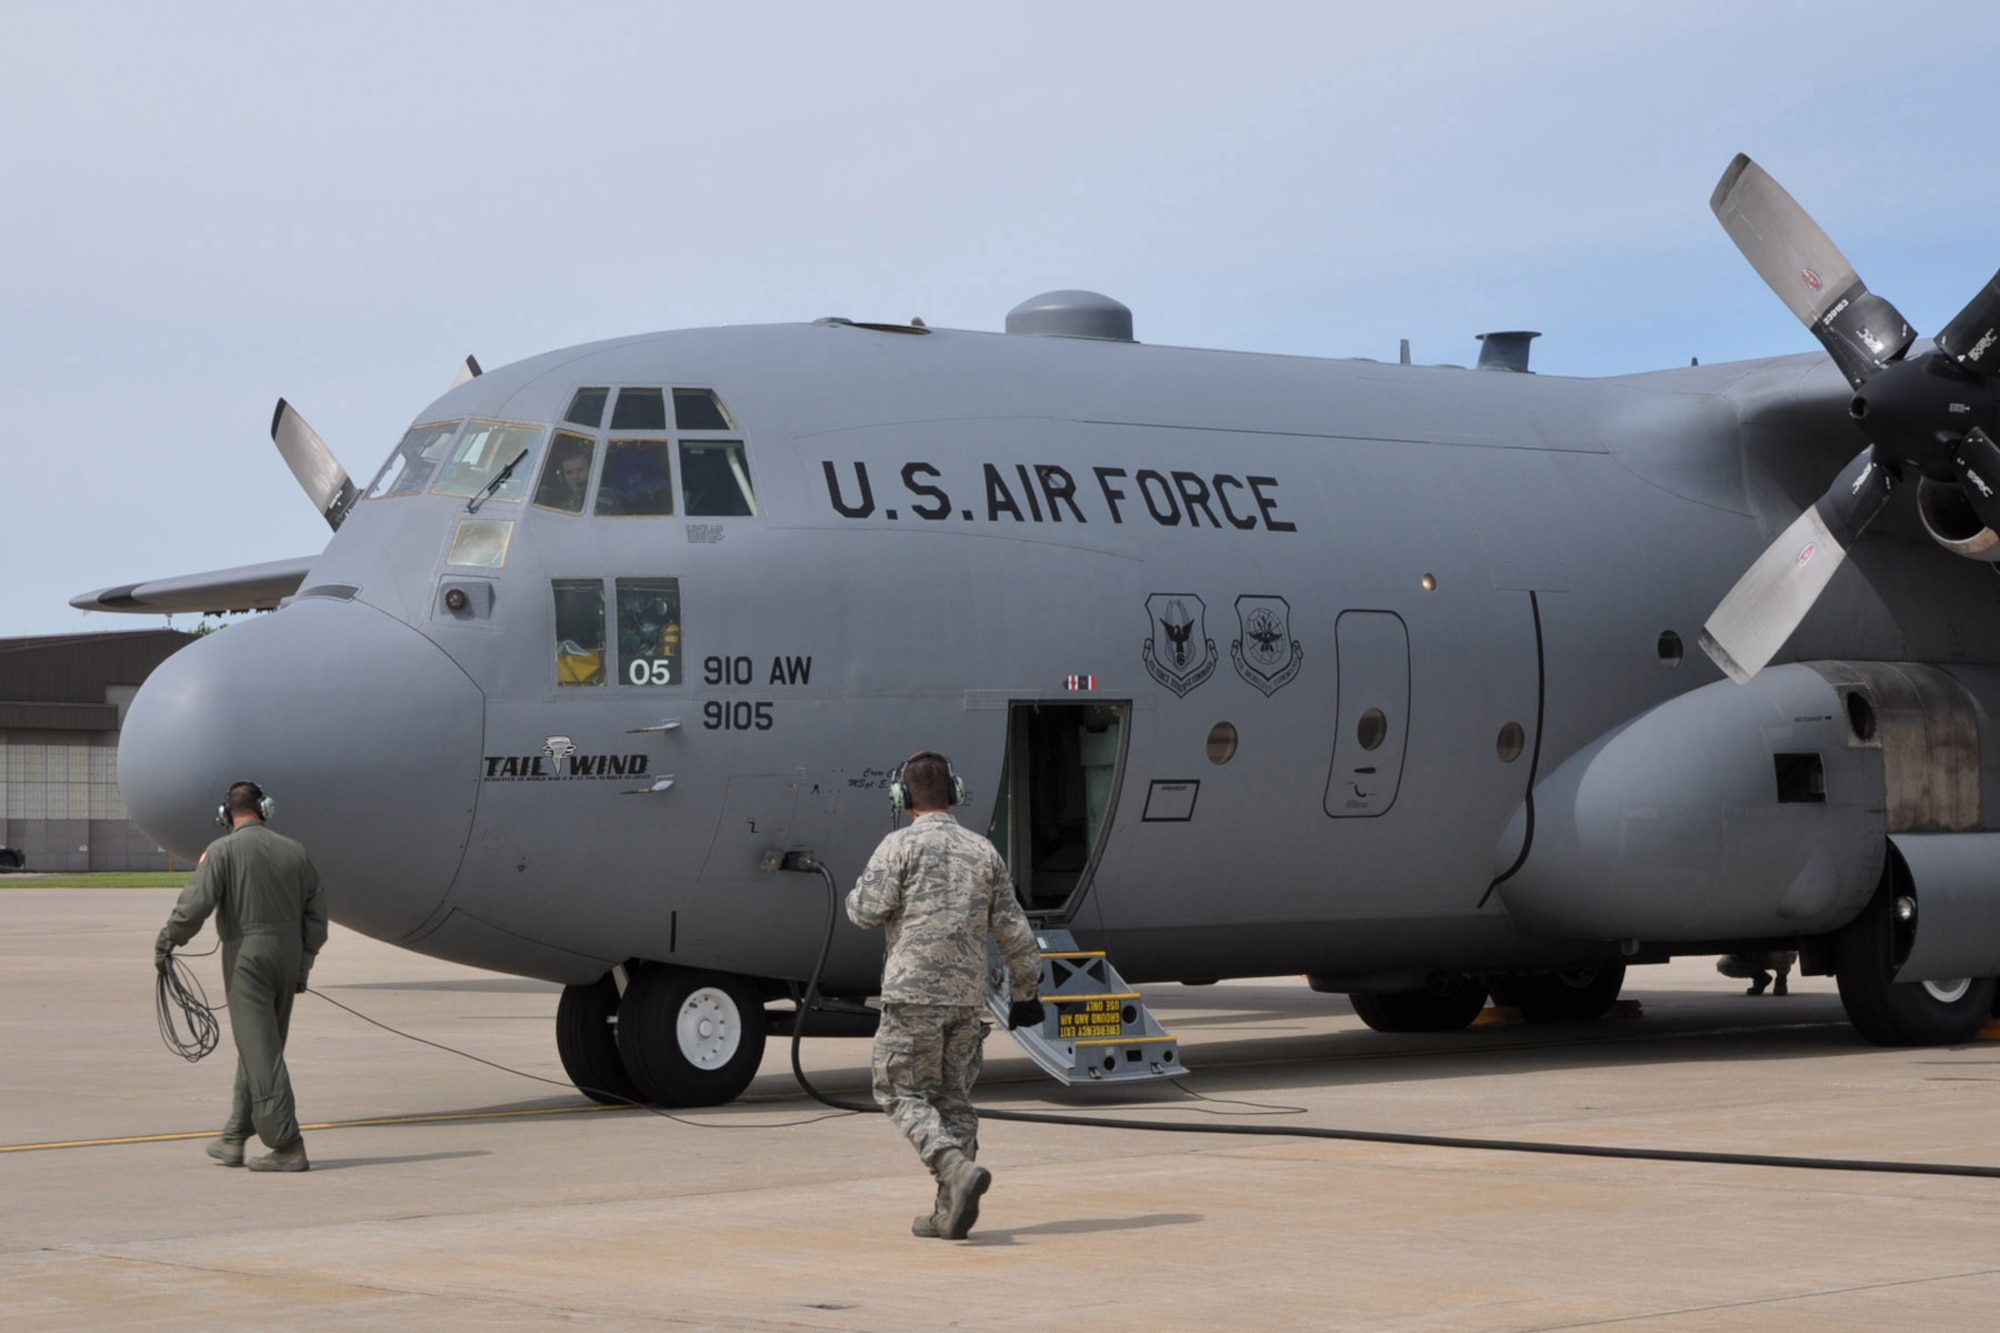 This C-130 Hercules and crew from the Air Force Reserve Command's 910th Airlift Wing prepares to leave Youngstown Air Reserve Station in Ohio, April 29, 2010, for a staging area in the Gulf Coast region in anticipation of supporting emergency oil spill cleanup efforts. (Air Force photo/Master Sgt. Bob Barko Jr.)